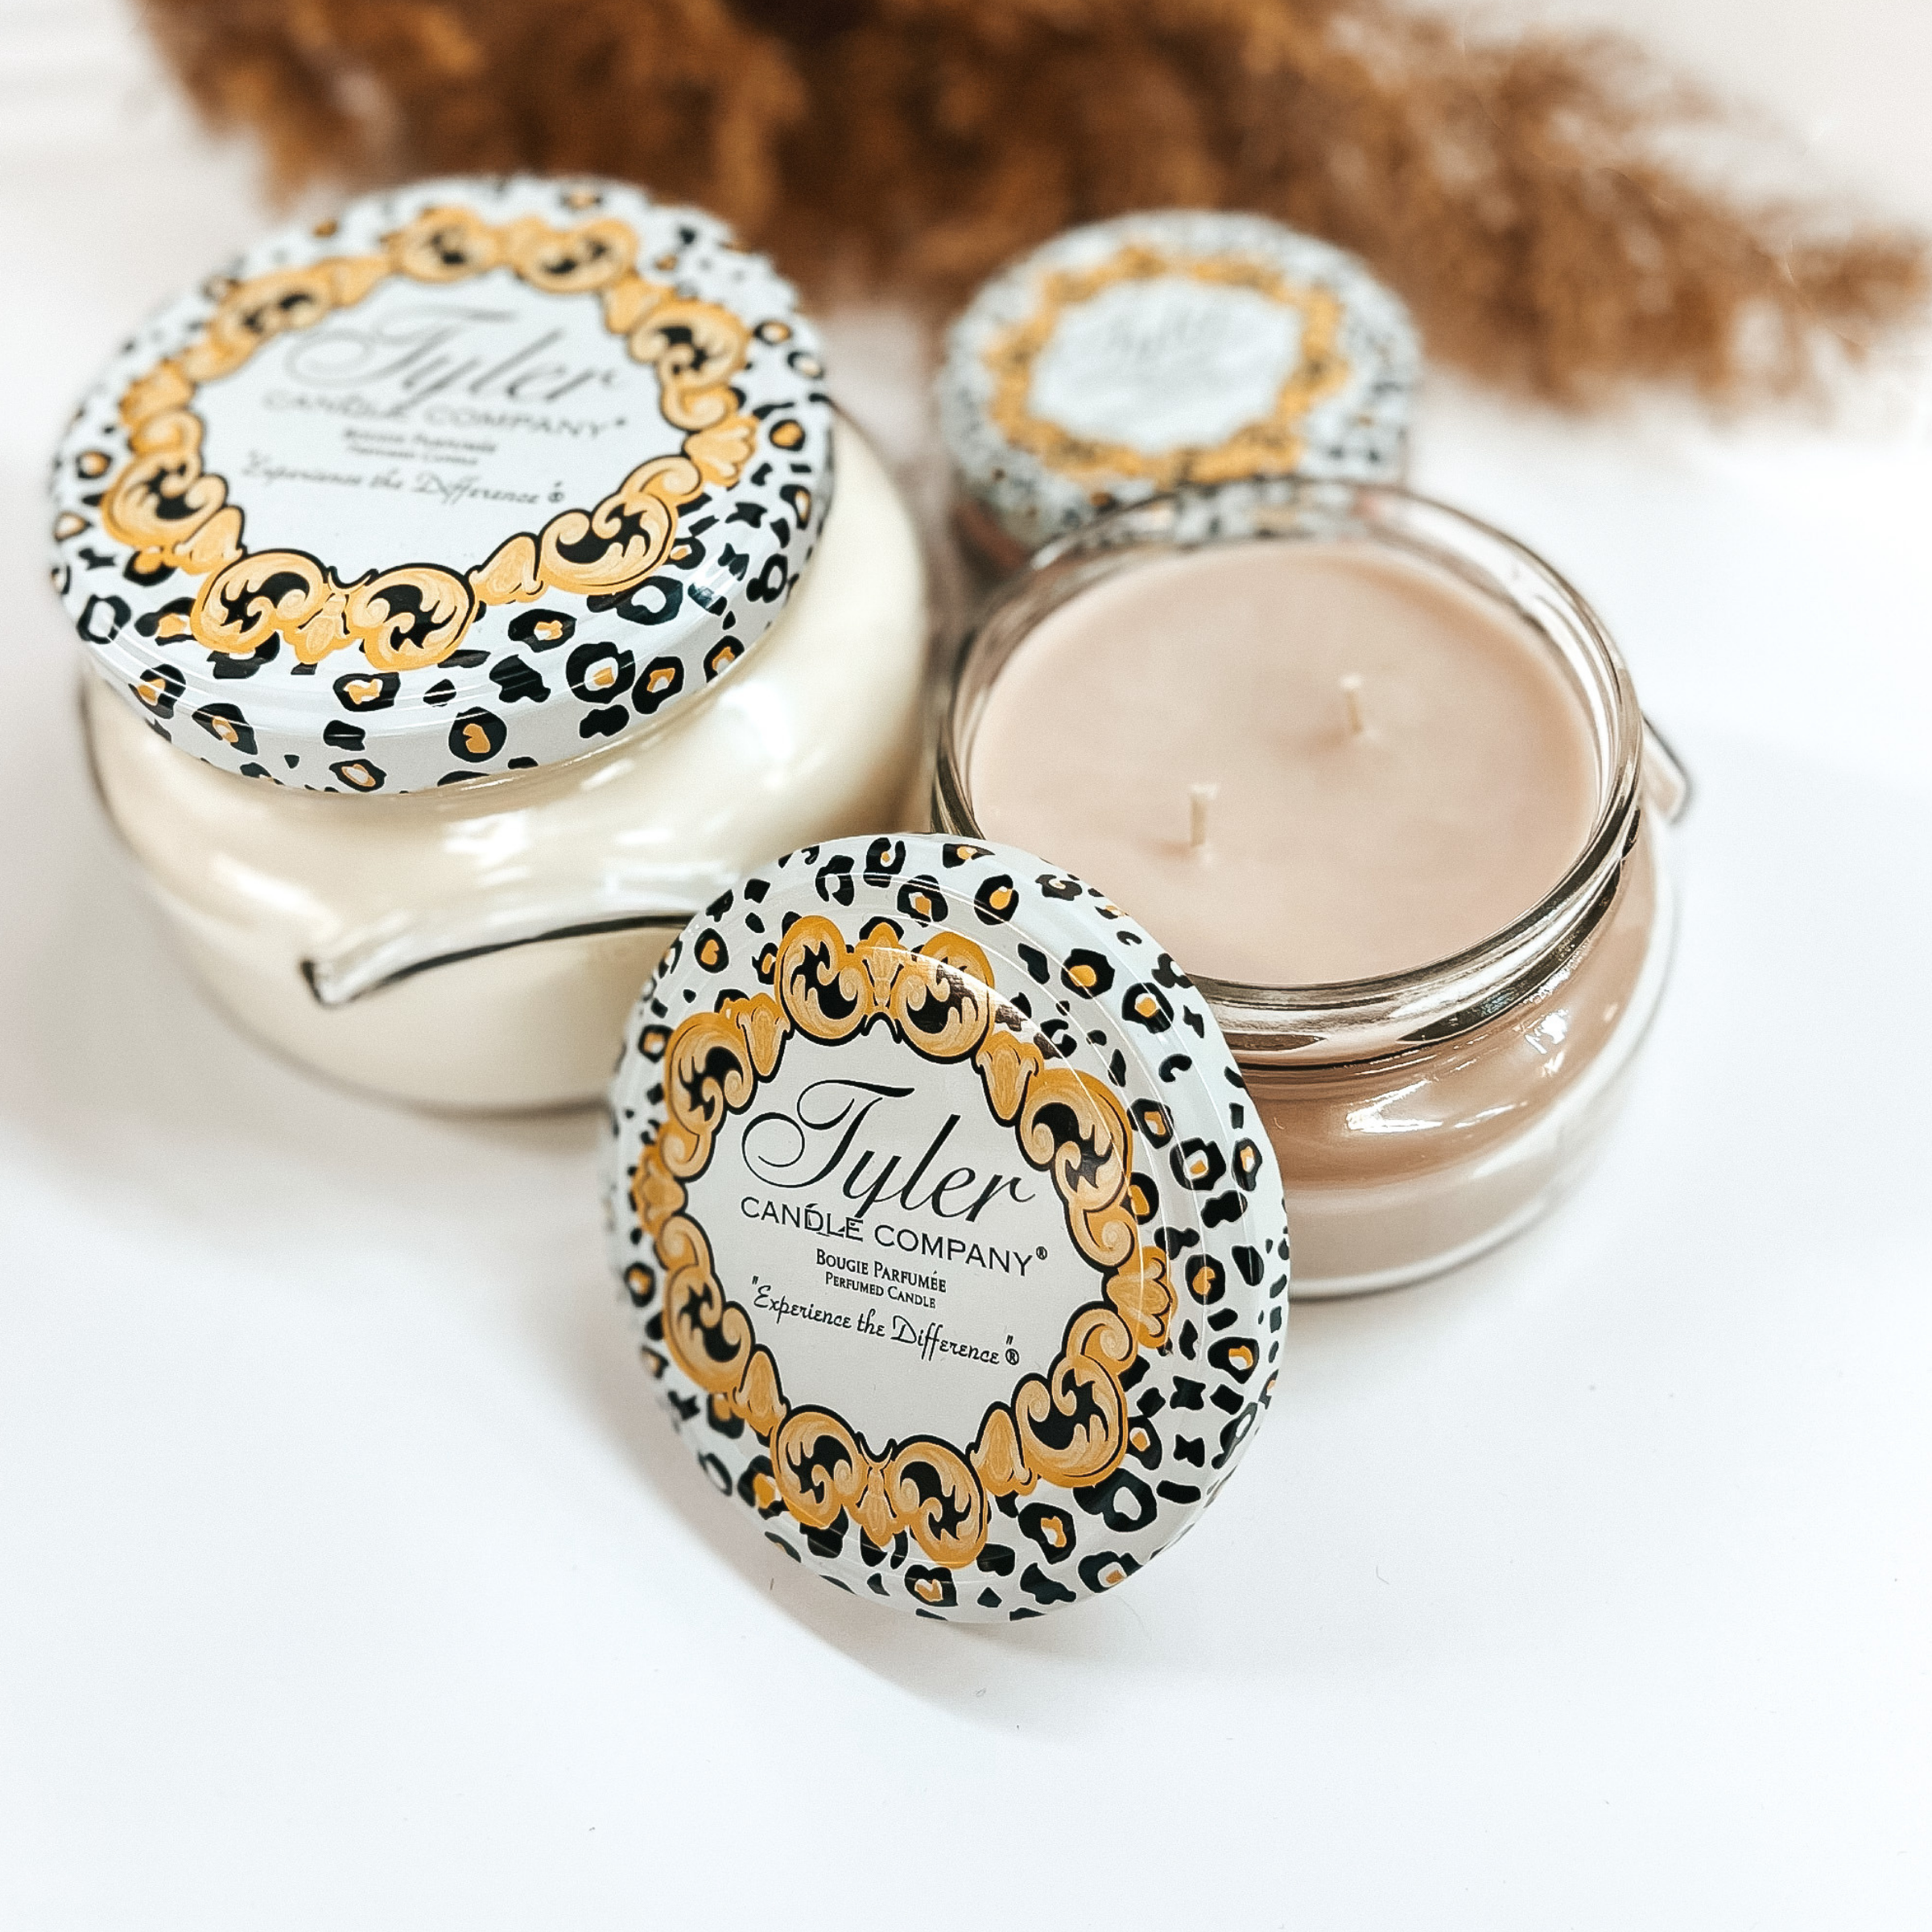 Tyler Candle Company | 11 oz. 2 Wick Jar Candle | Best Selling Scents - Giddy Up Glamour Boutique